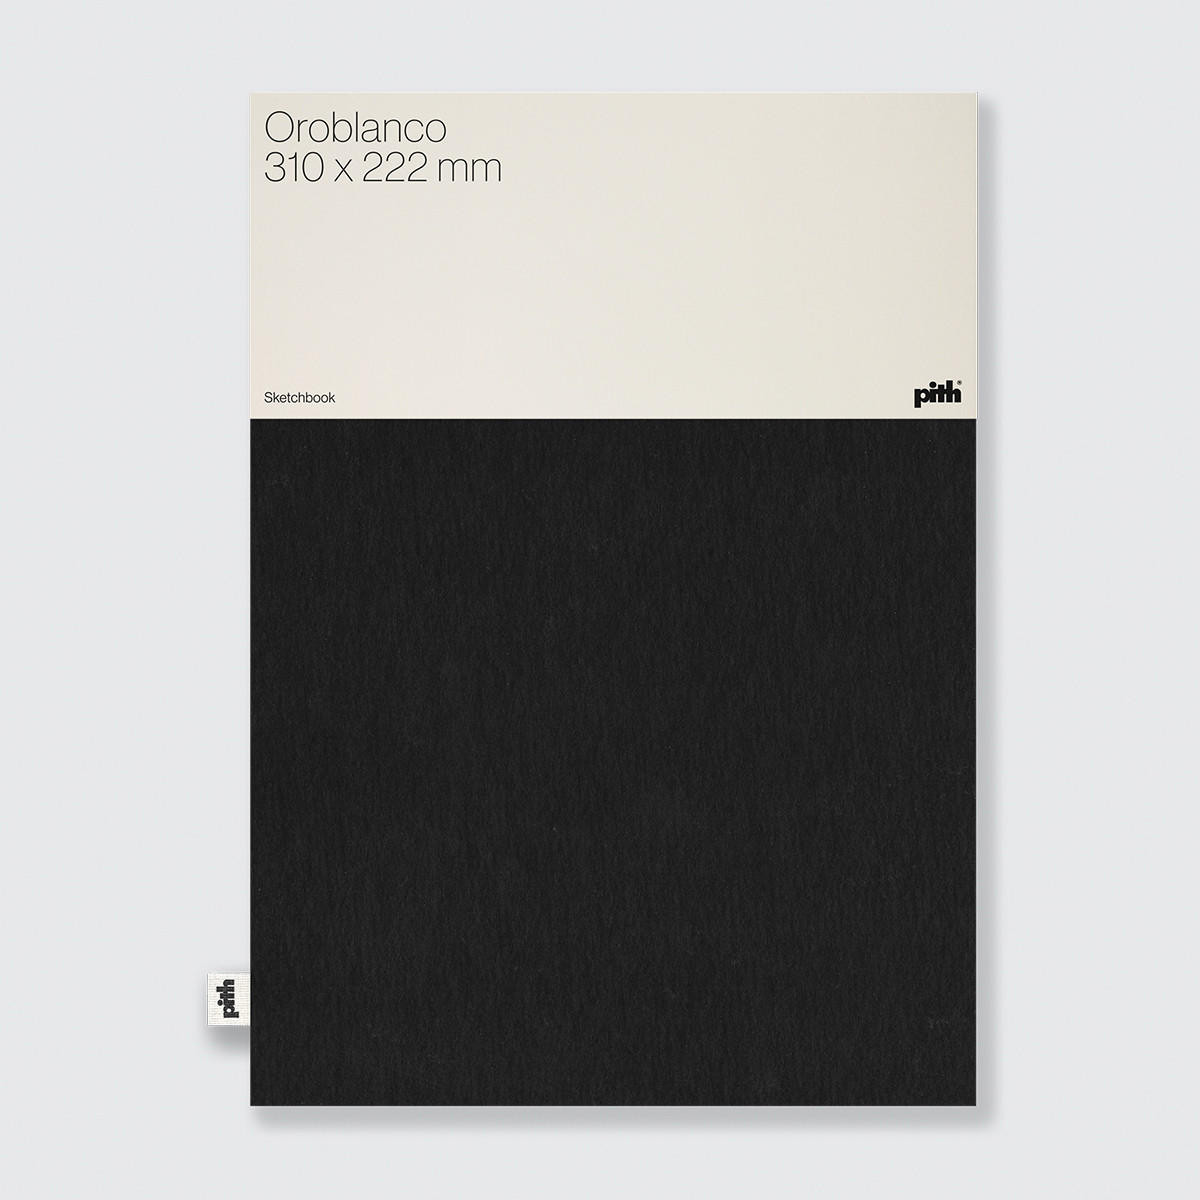 Pith Oroblanco Sketchbook 200gsm 76 Pages 310 X 222mm - Black